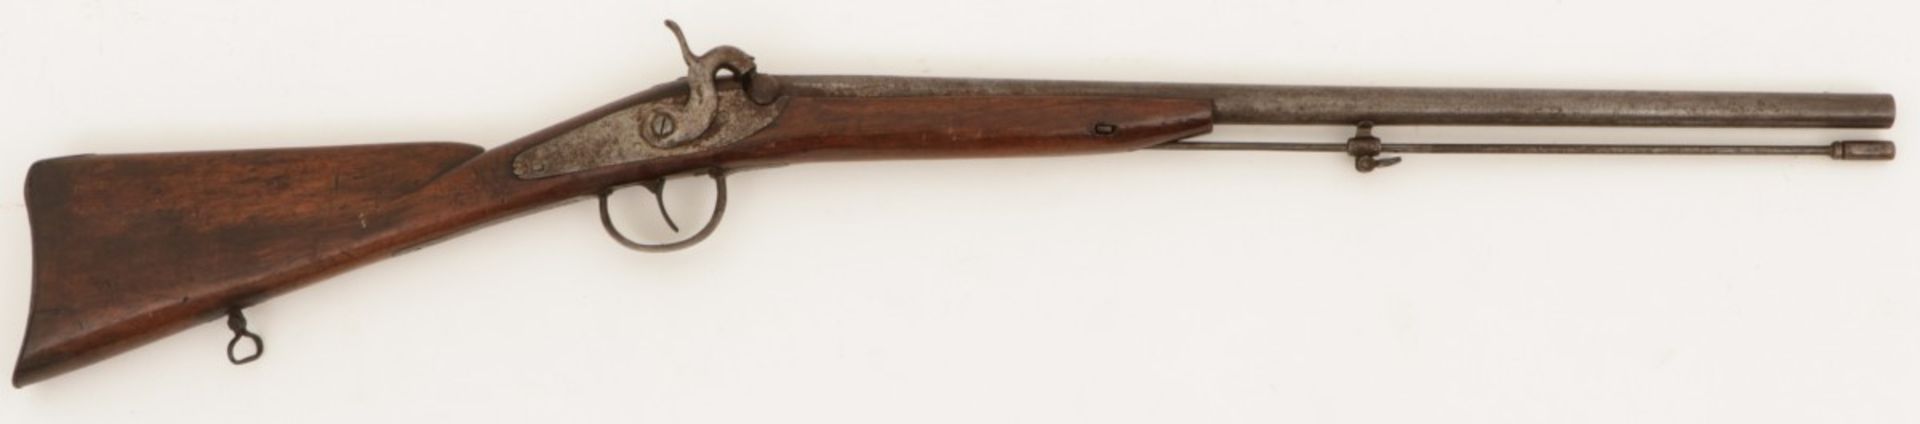 A percussion rifle, France/ Belgium, late 19th century.